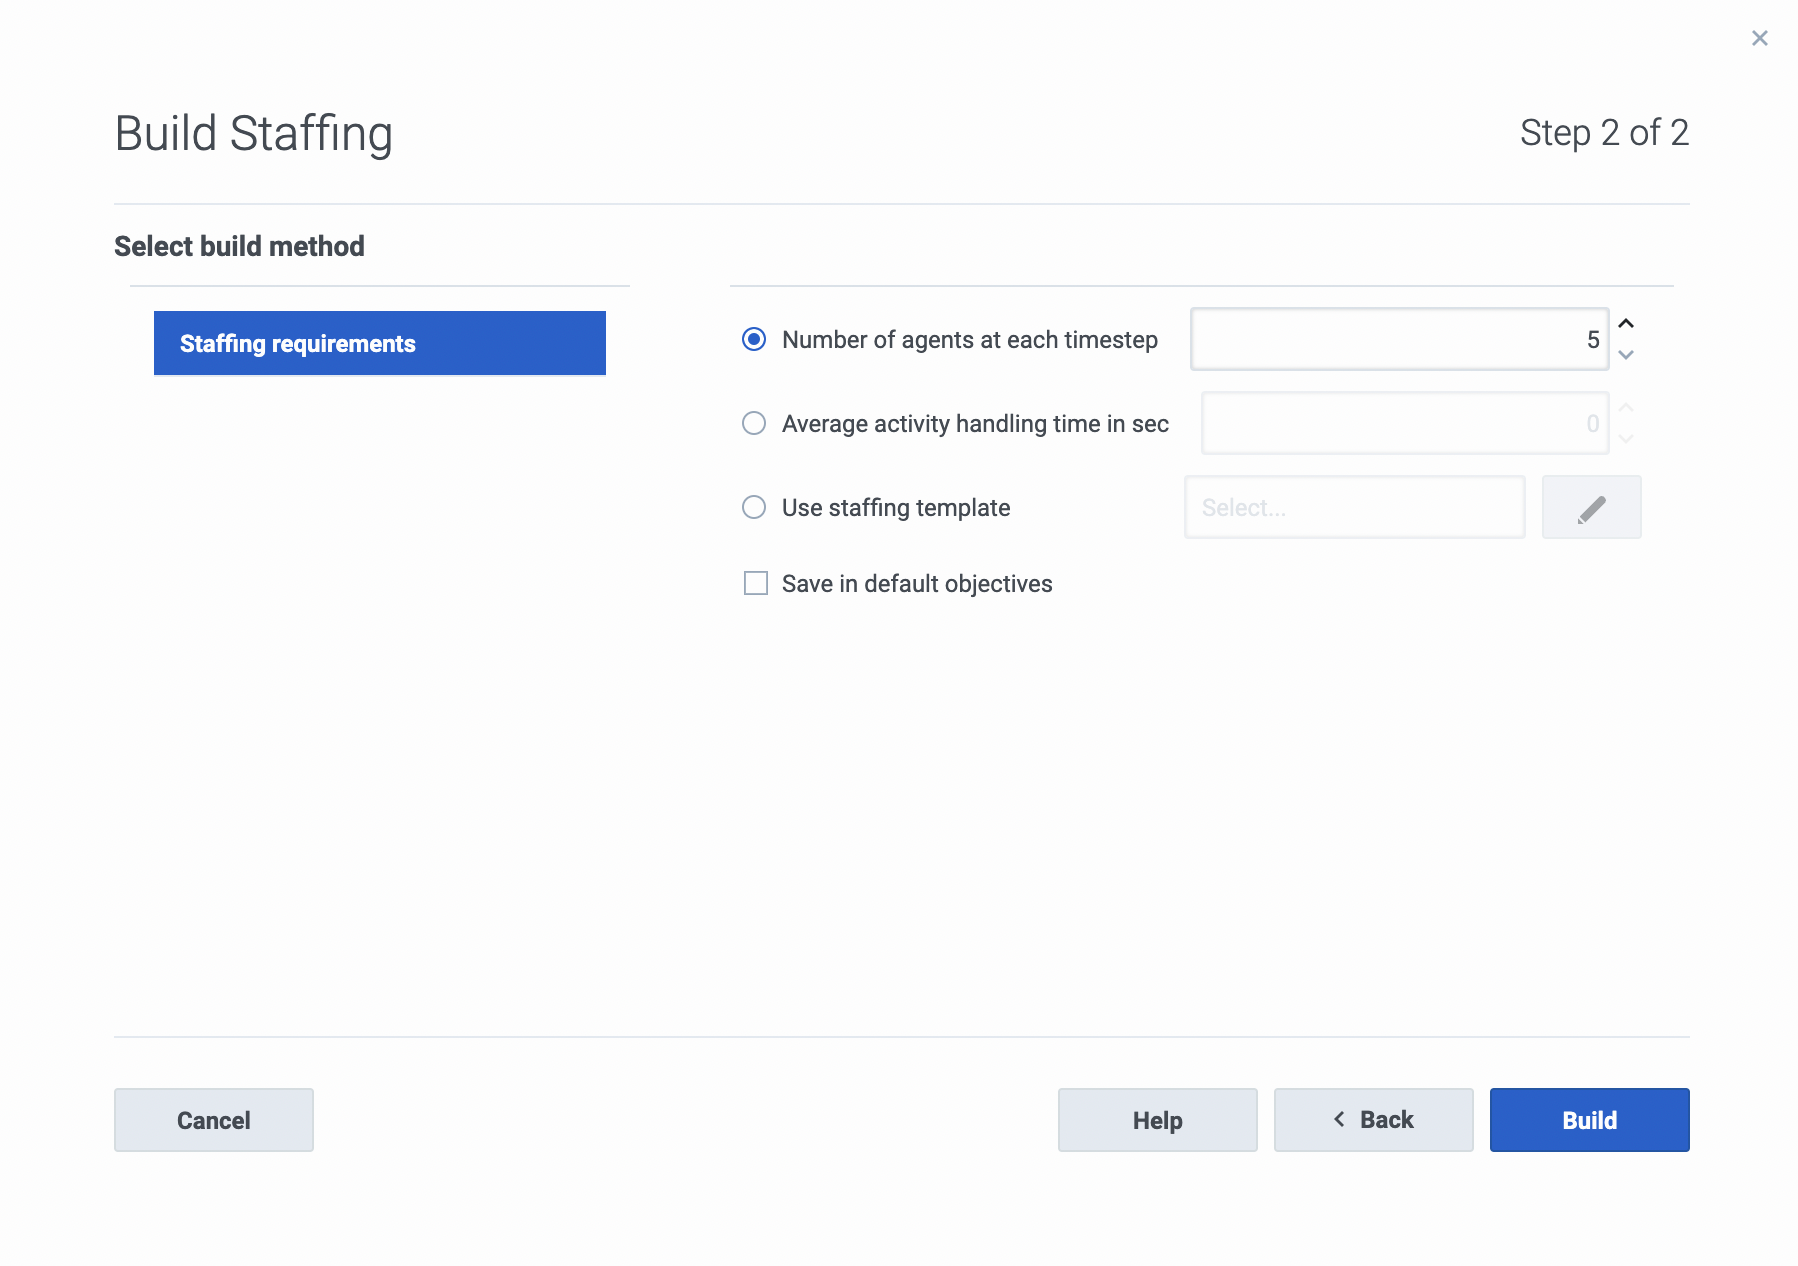 Step 2 of the Build Staffing dialog.